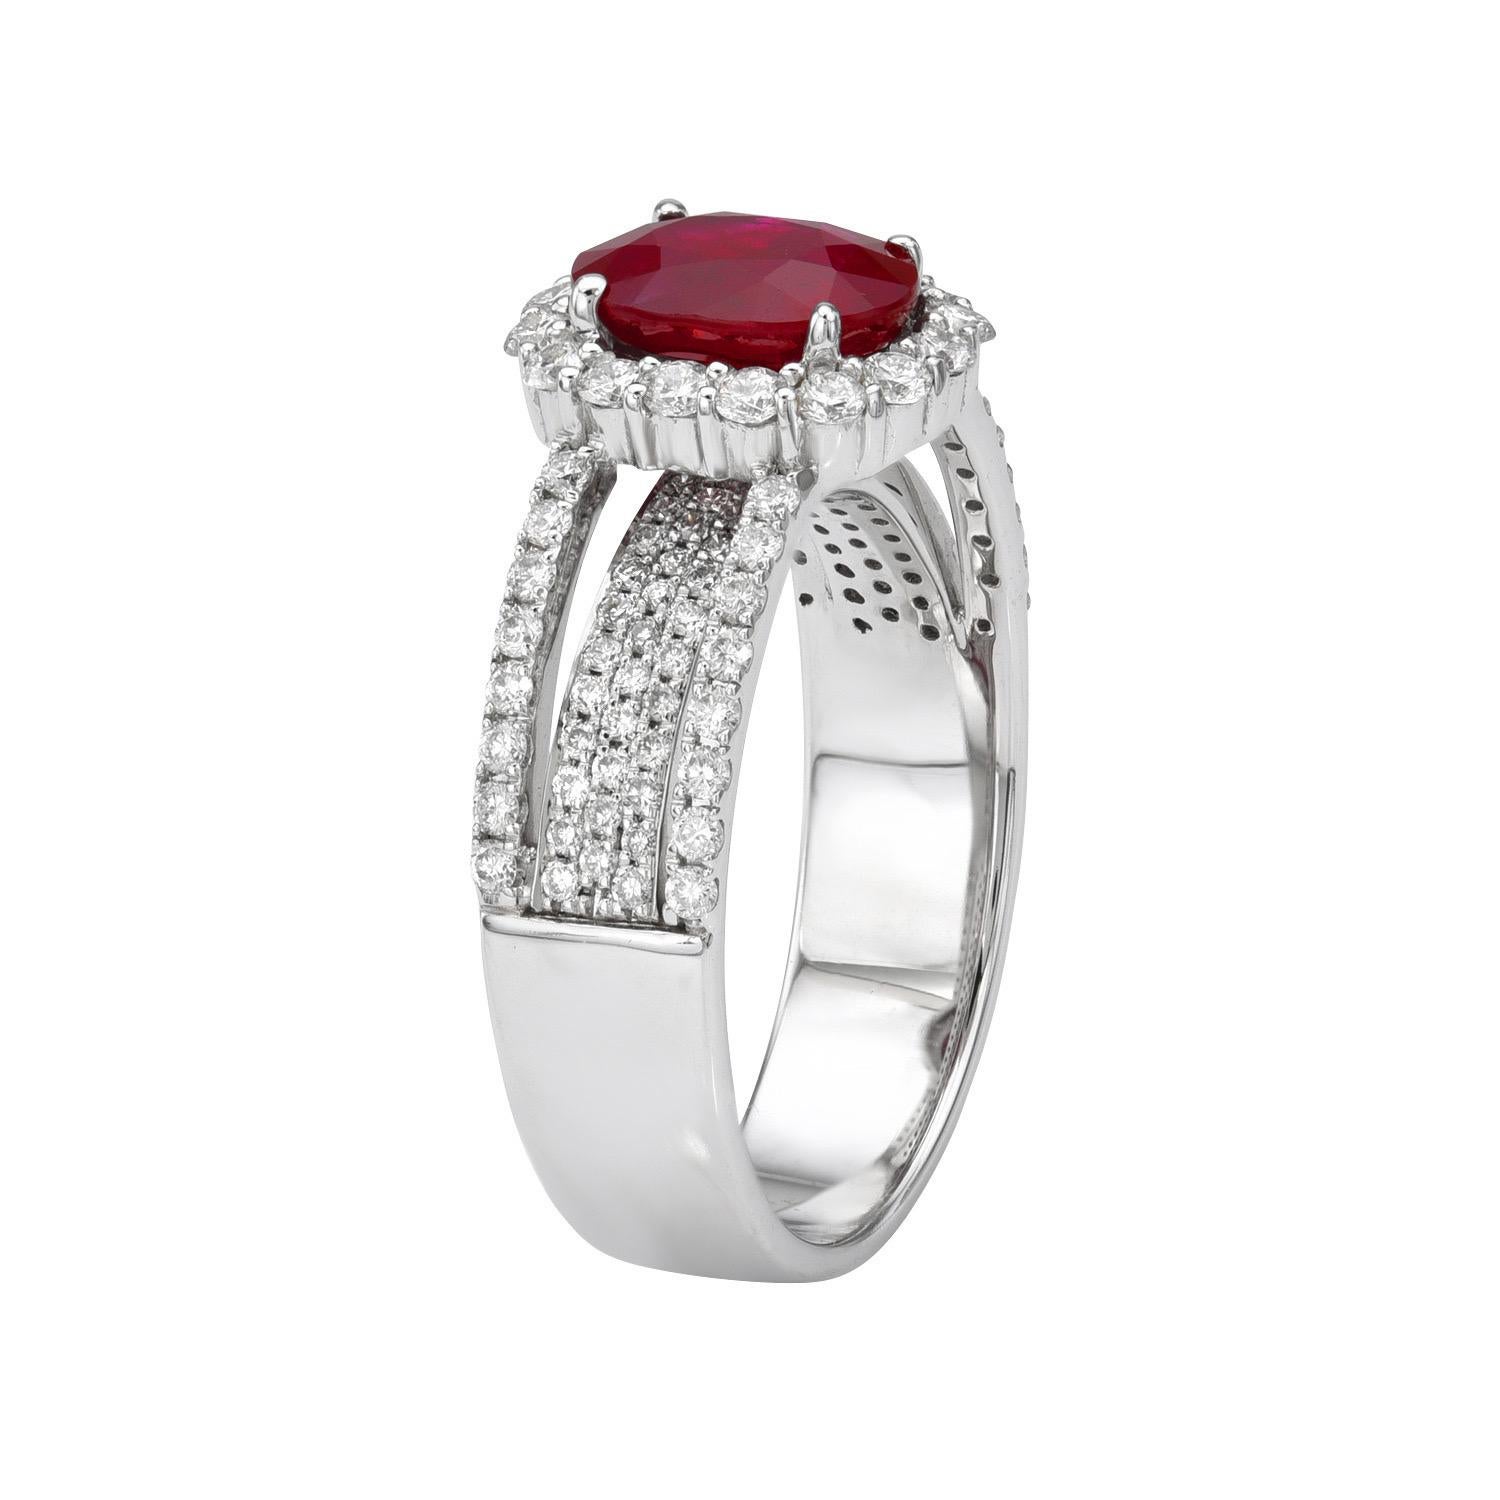 1.70 carat Ruby oval 18K white gold ring, decorated with round brilliant diamonds totaling 0.70 carats.
Ring size 6.5. Resizing is complementary upon request.
Returns are accepted and paid by us within 7 days of delivery.